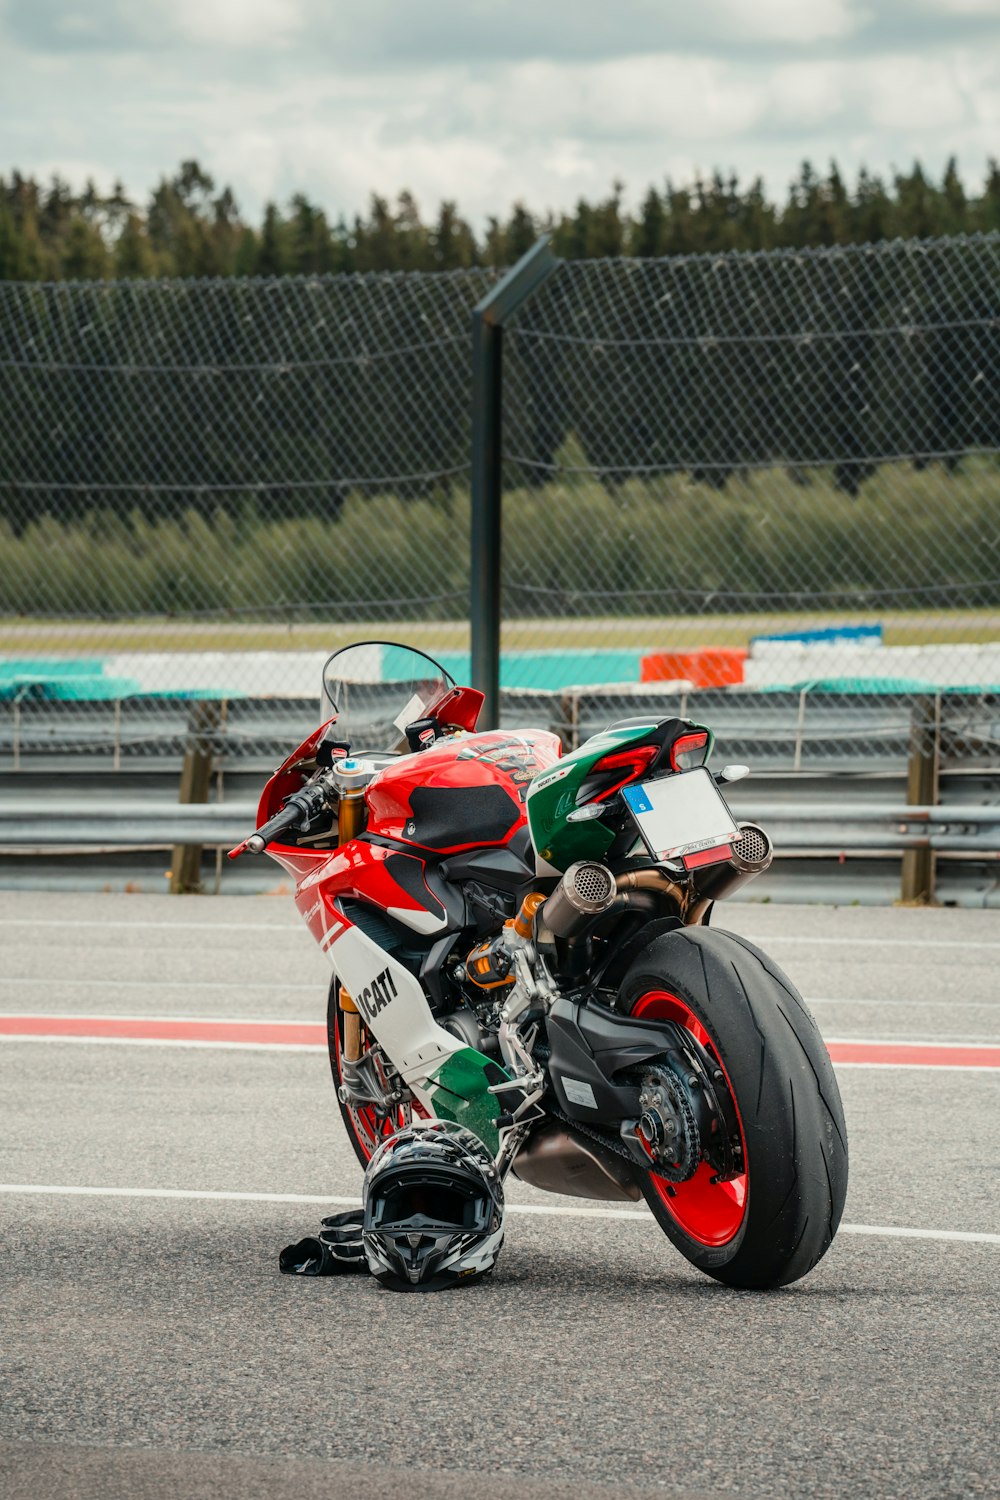 a red and green motorcycle parked on a race track